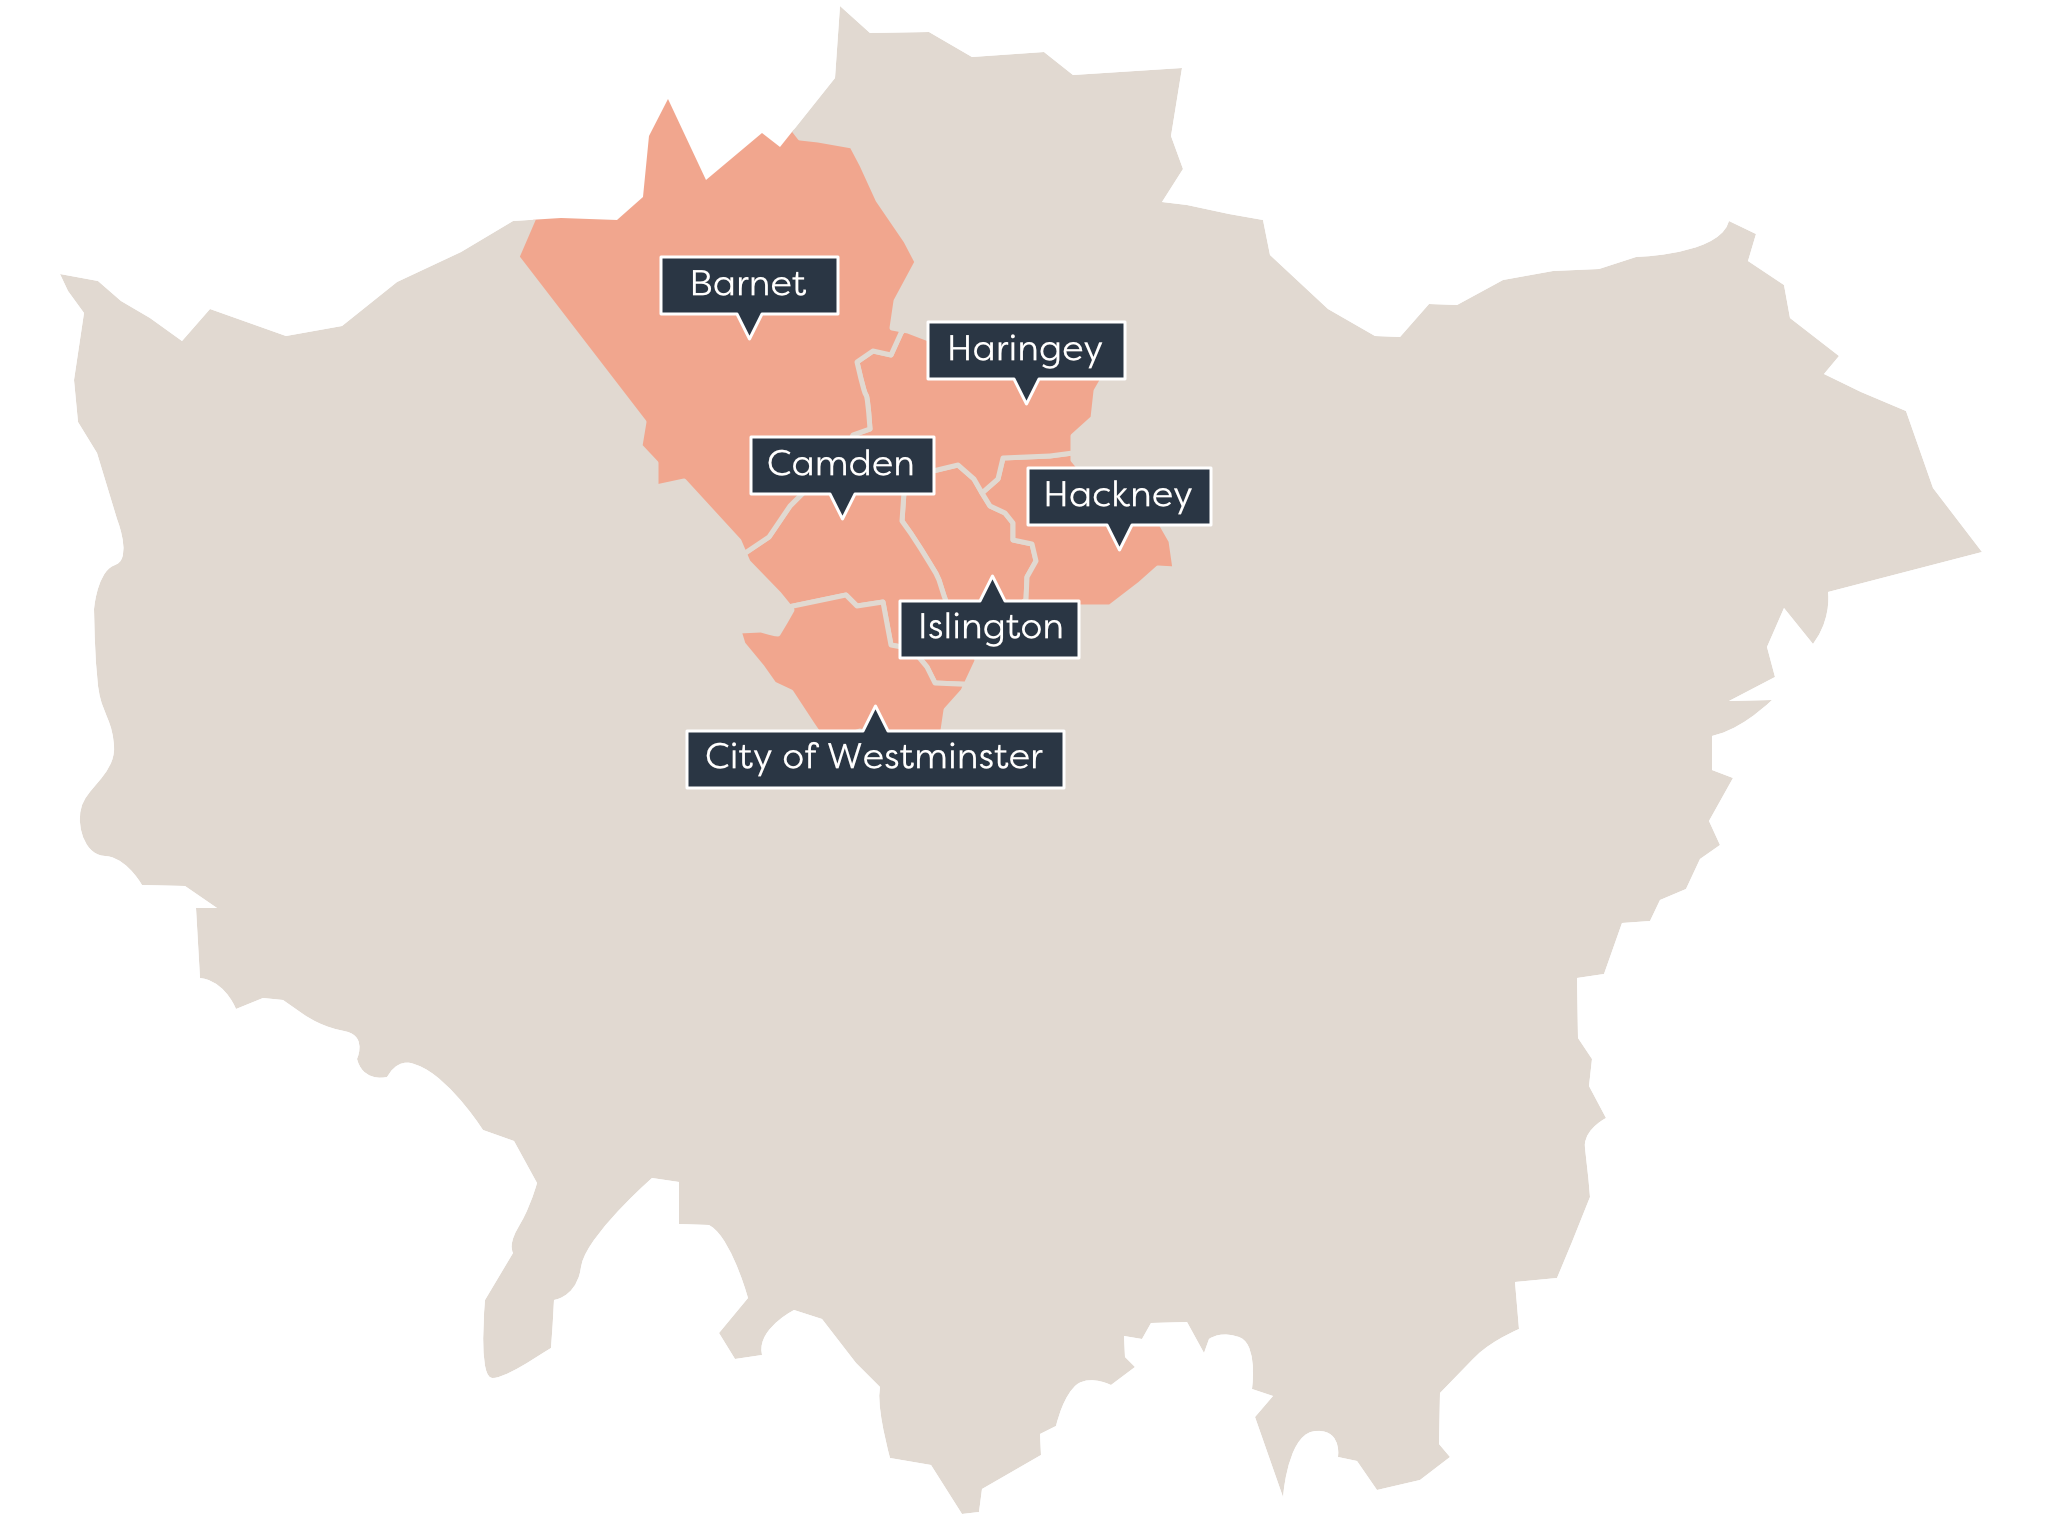 Map of London with the boroughs of Islington, Haringey, Barnet, Camden, Hackney and City of Westminster highlighted